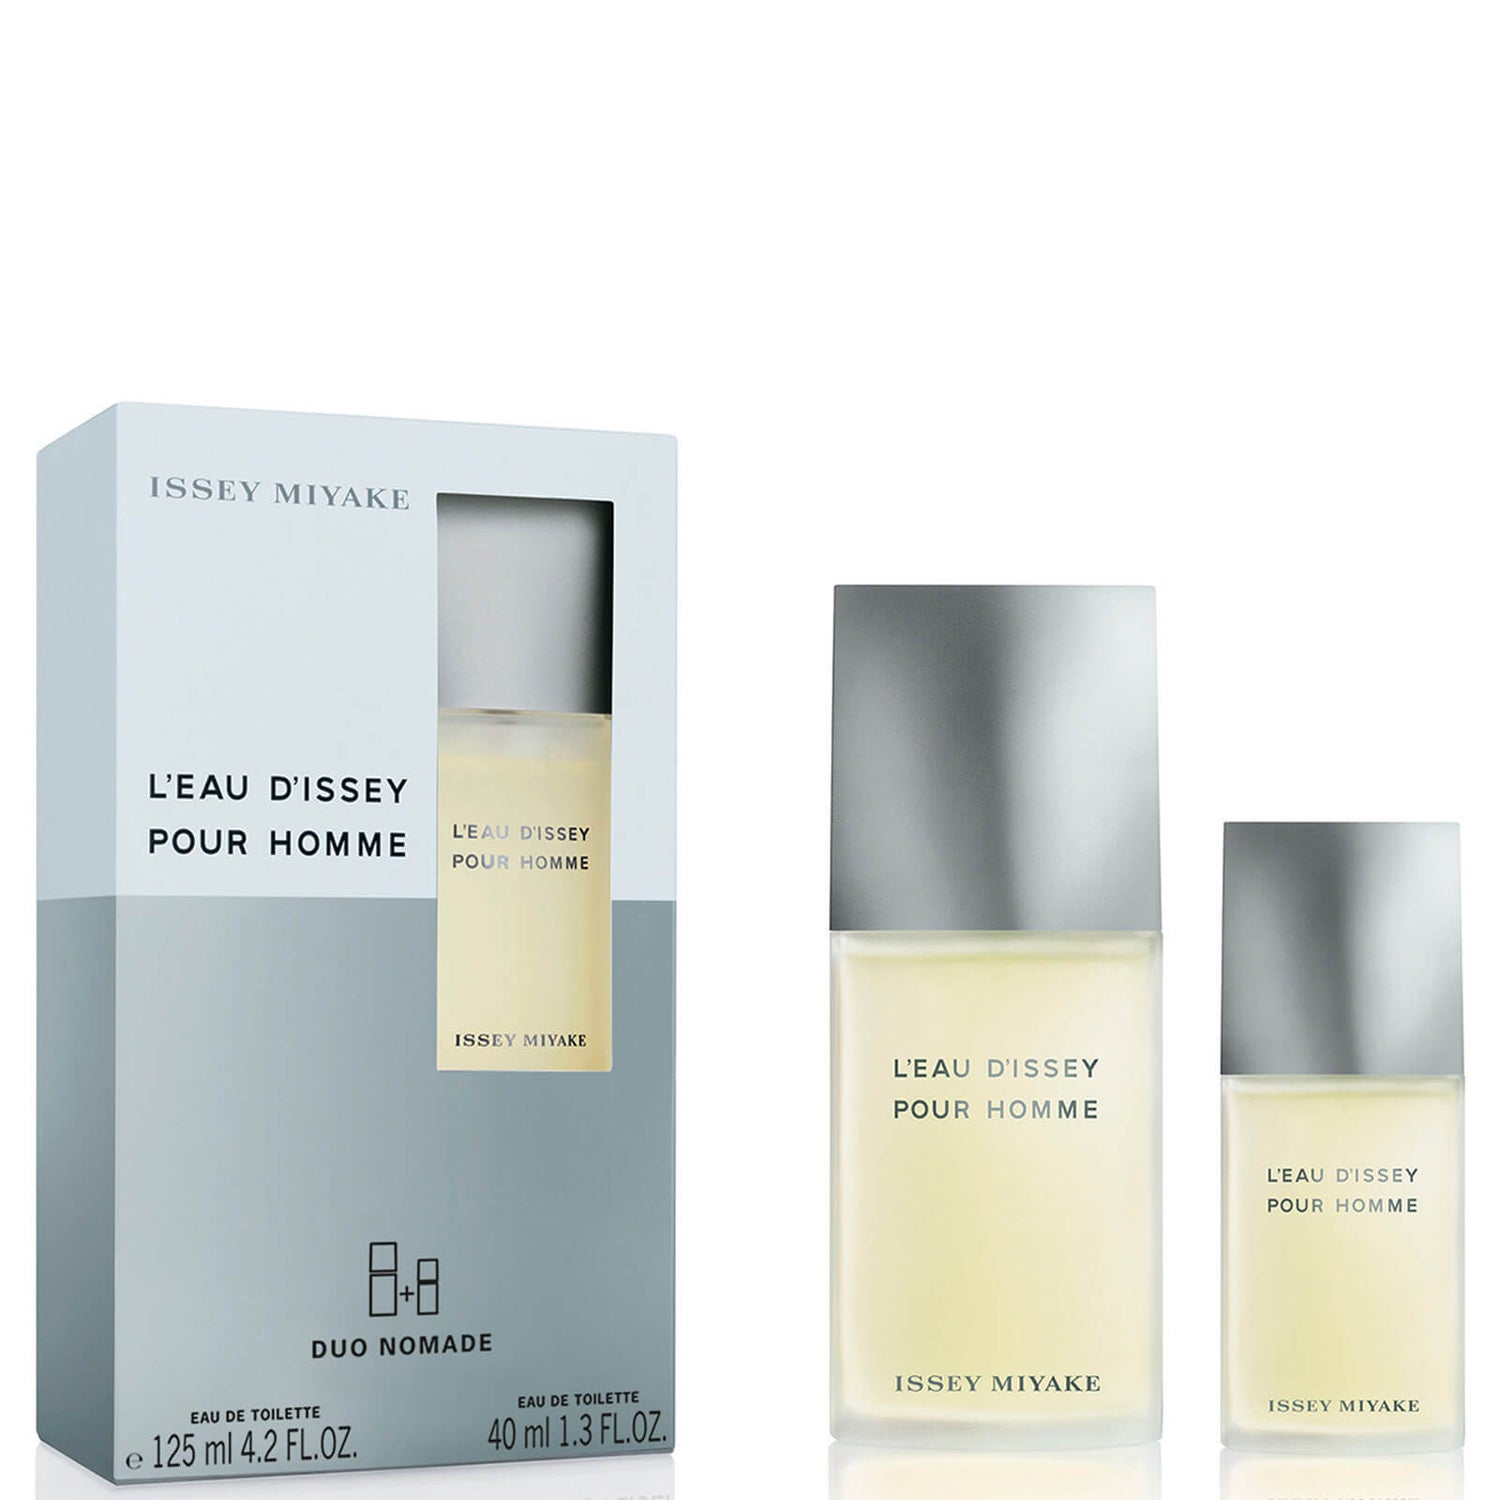 ISSEY MIYAKE L'Eau d'Issey Pour Homme Gift Pack 125ml Eau de Toilette + 40ml Eau de Toilette